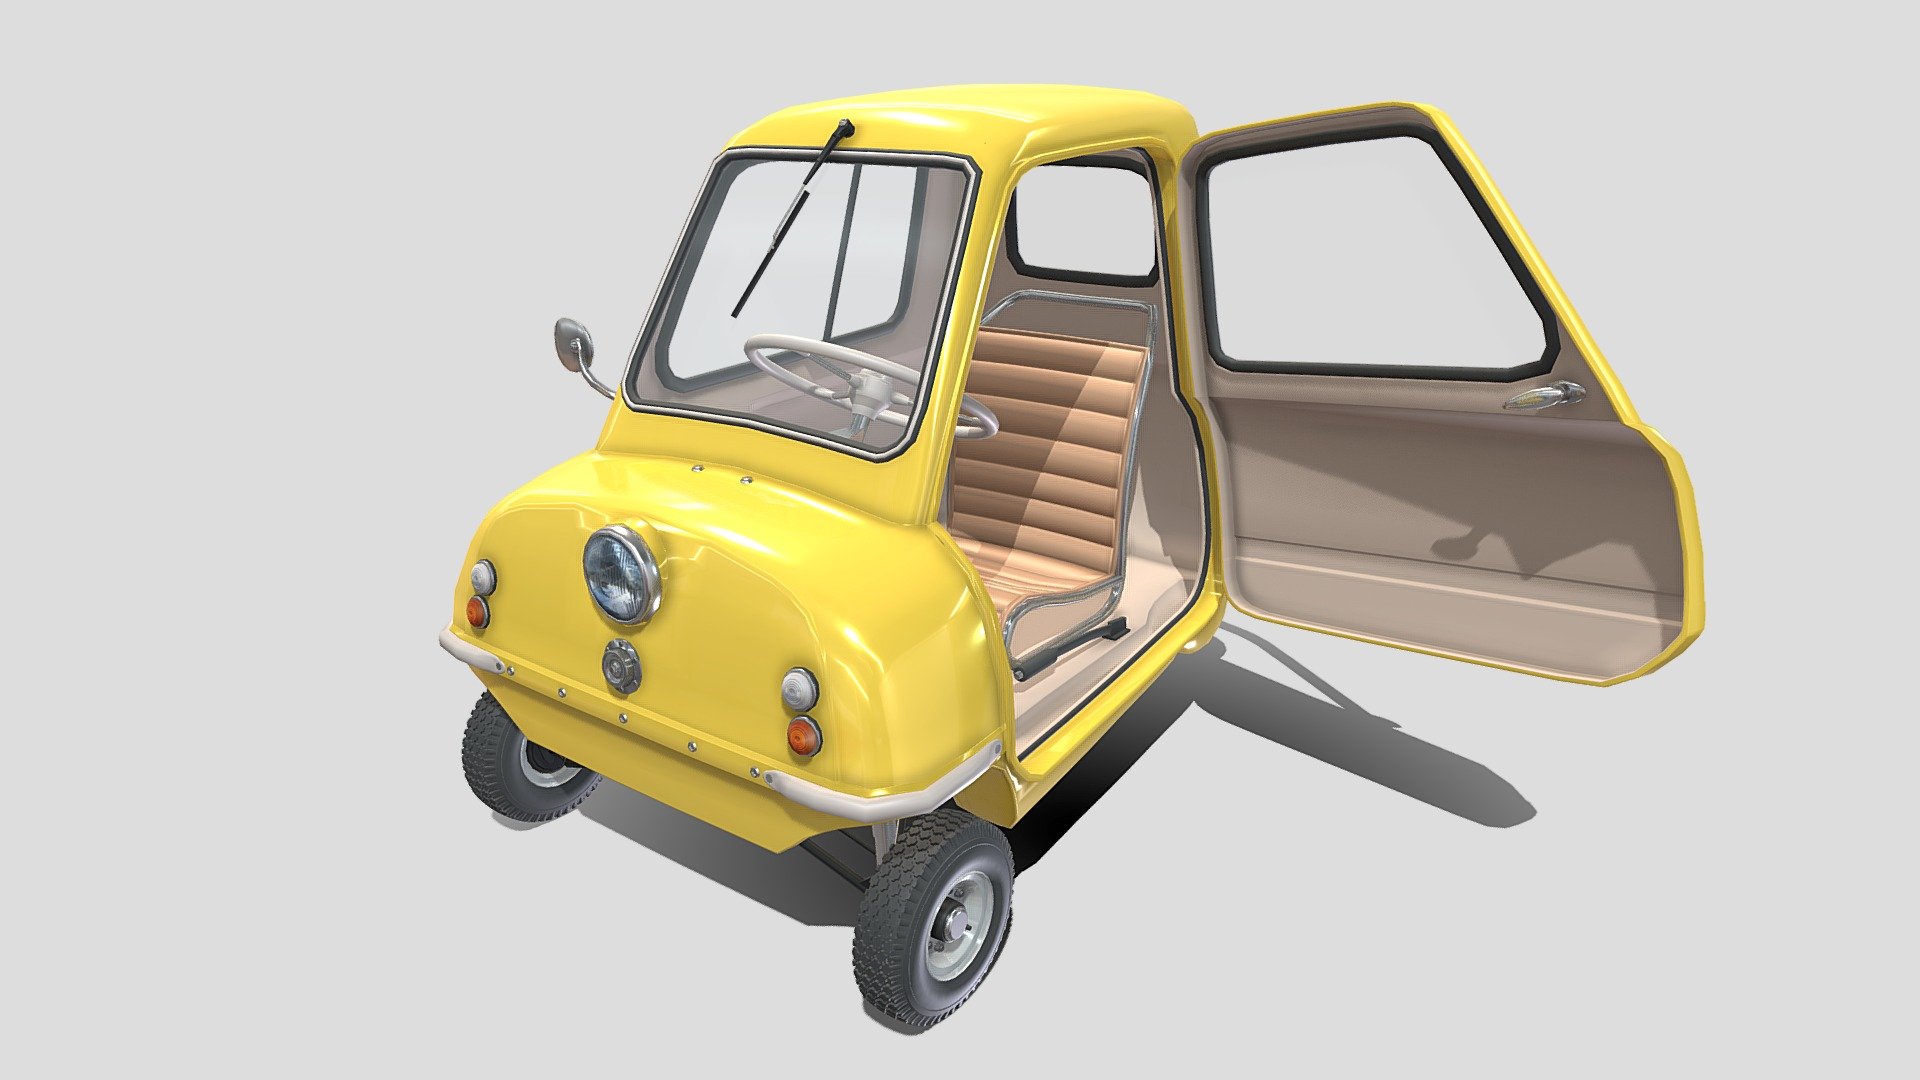 Highly detailed Peel P50 Micro Car with a detailed interior and drivetrain (suspension, chassis, motor, steering, brakes) 3d model rendered with Cycles in Blender, as per seen on attached images. 
The 3d model is scaled to original size in Blender.

File formats:
-.blend, rendered with cycles, as seen in the images;
-.blend, open, rendered with cycles, as seen in the images;
-.blend, with a seethrough of the chassis and drivetrain, rendered with cycles, as seen in the images;
-.obj, with materials applied;
-.obj, open, with materials applied;
-.dae, with materials applied;
-.dae, open, with materials applied;
-.fbx, with materials applied;
-.fbx, open, with materials applied;
-.stl;
-.stl, open;

Files come named appropriately and split by file format.

3D Software:
The 3D model was originally created in Blender 2.8 and rendered with Cycles.

Materials and textures:
The models have materials applied in all formats, and are ready to import and render.
The models come with one png texture 3d model